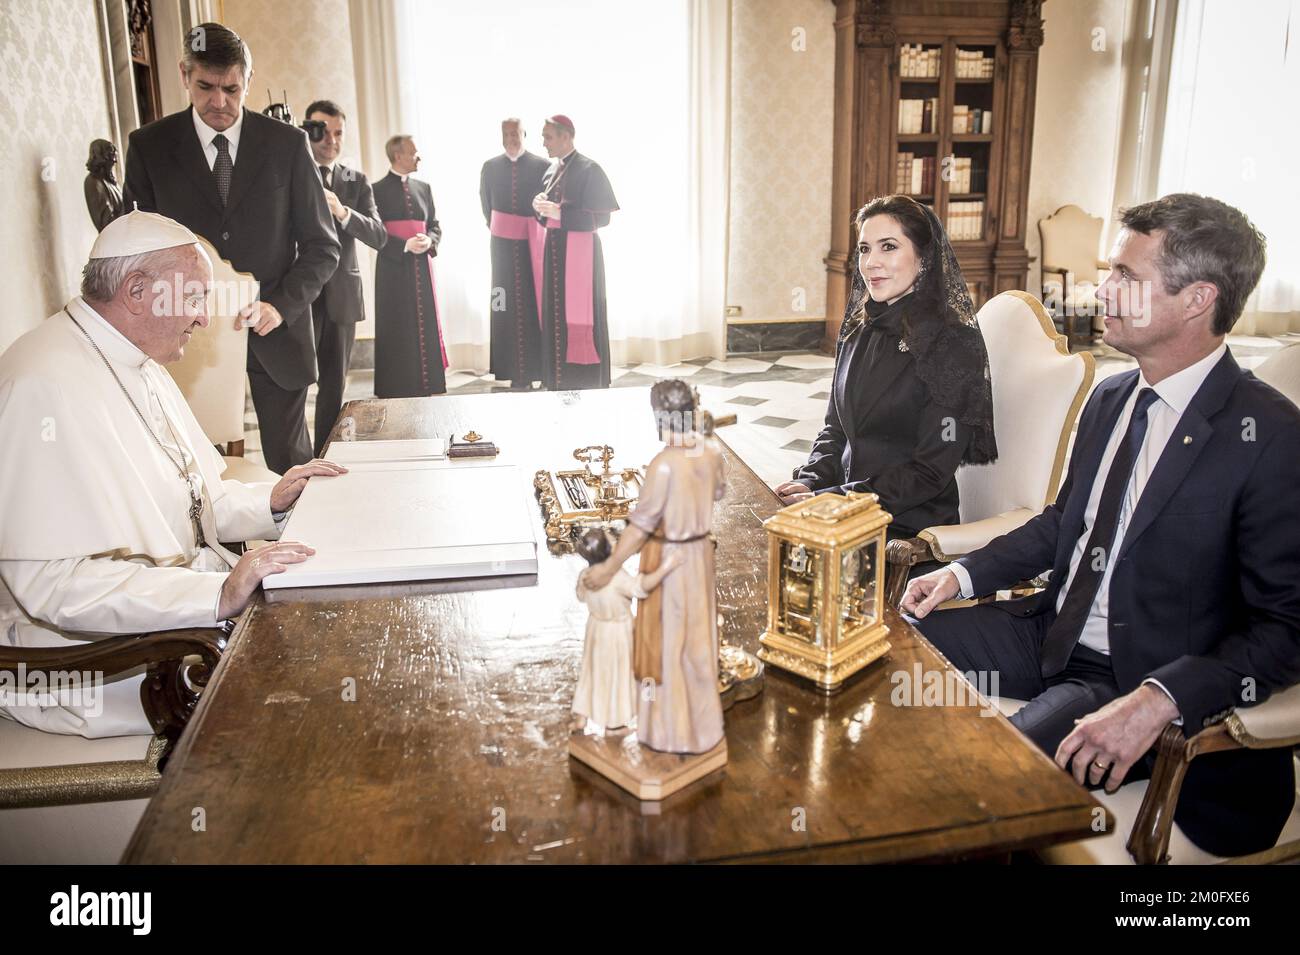 TRH Crown Prince Frederik and Crown Princess Mary had an audience with Pope Francis at the Vatican in Rome. The Crown Prince Couple is part of a business delegation promoting Danish/Italian business alliances and the visit lasts from November 6th to 8th. Stock Photo